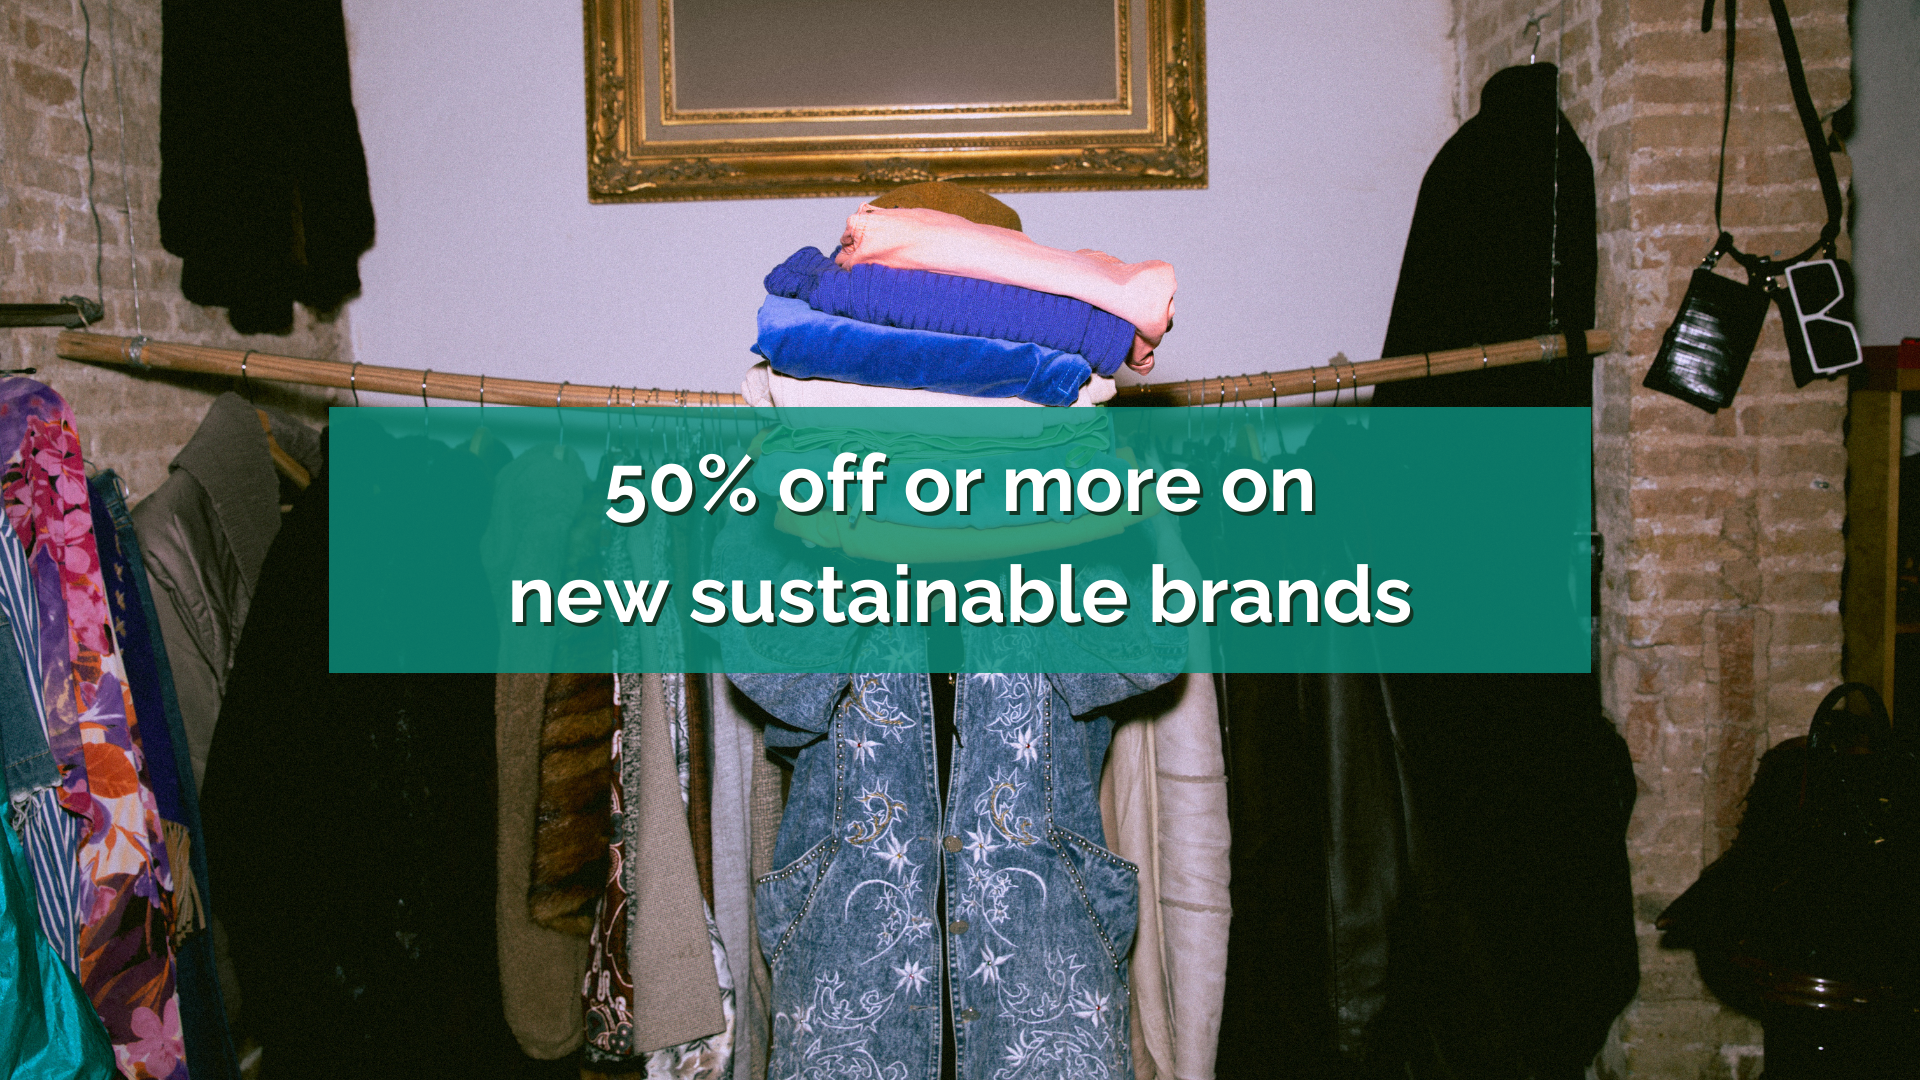 35% off or more on new sustainable brands.